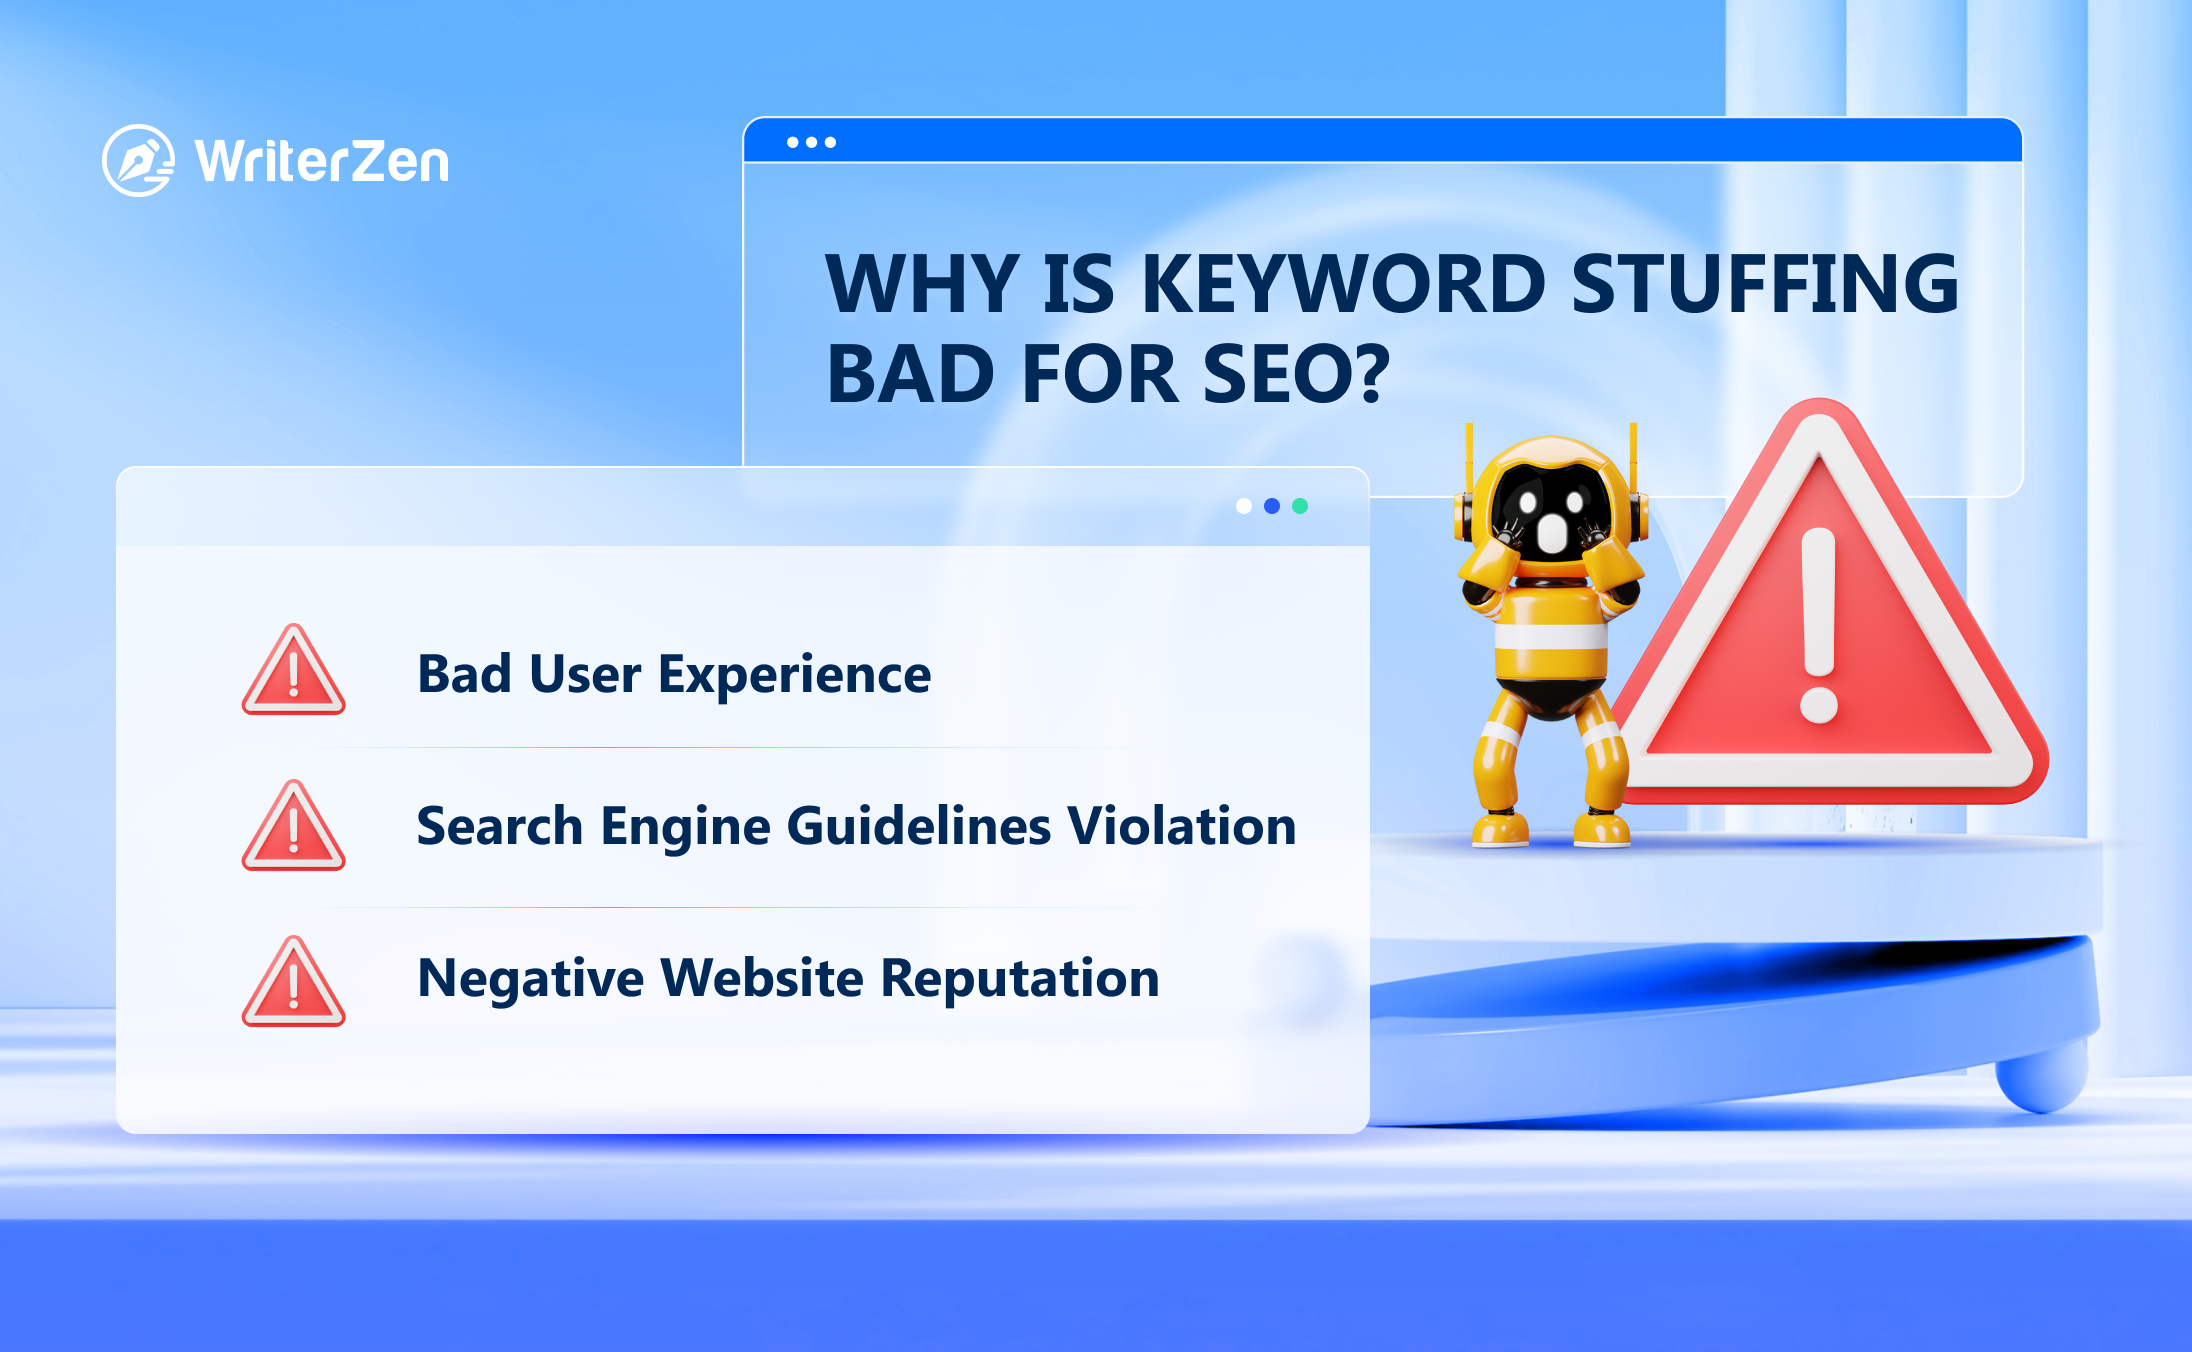 Why is Keyword Stuffing Bad for SEO?